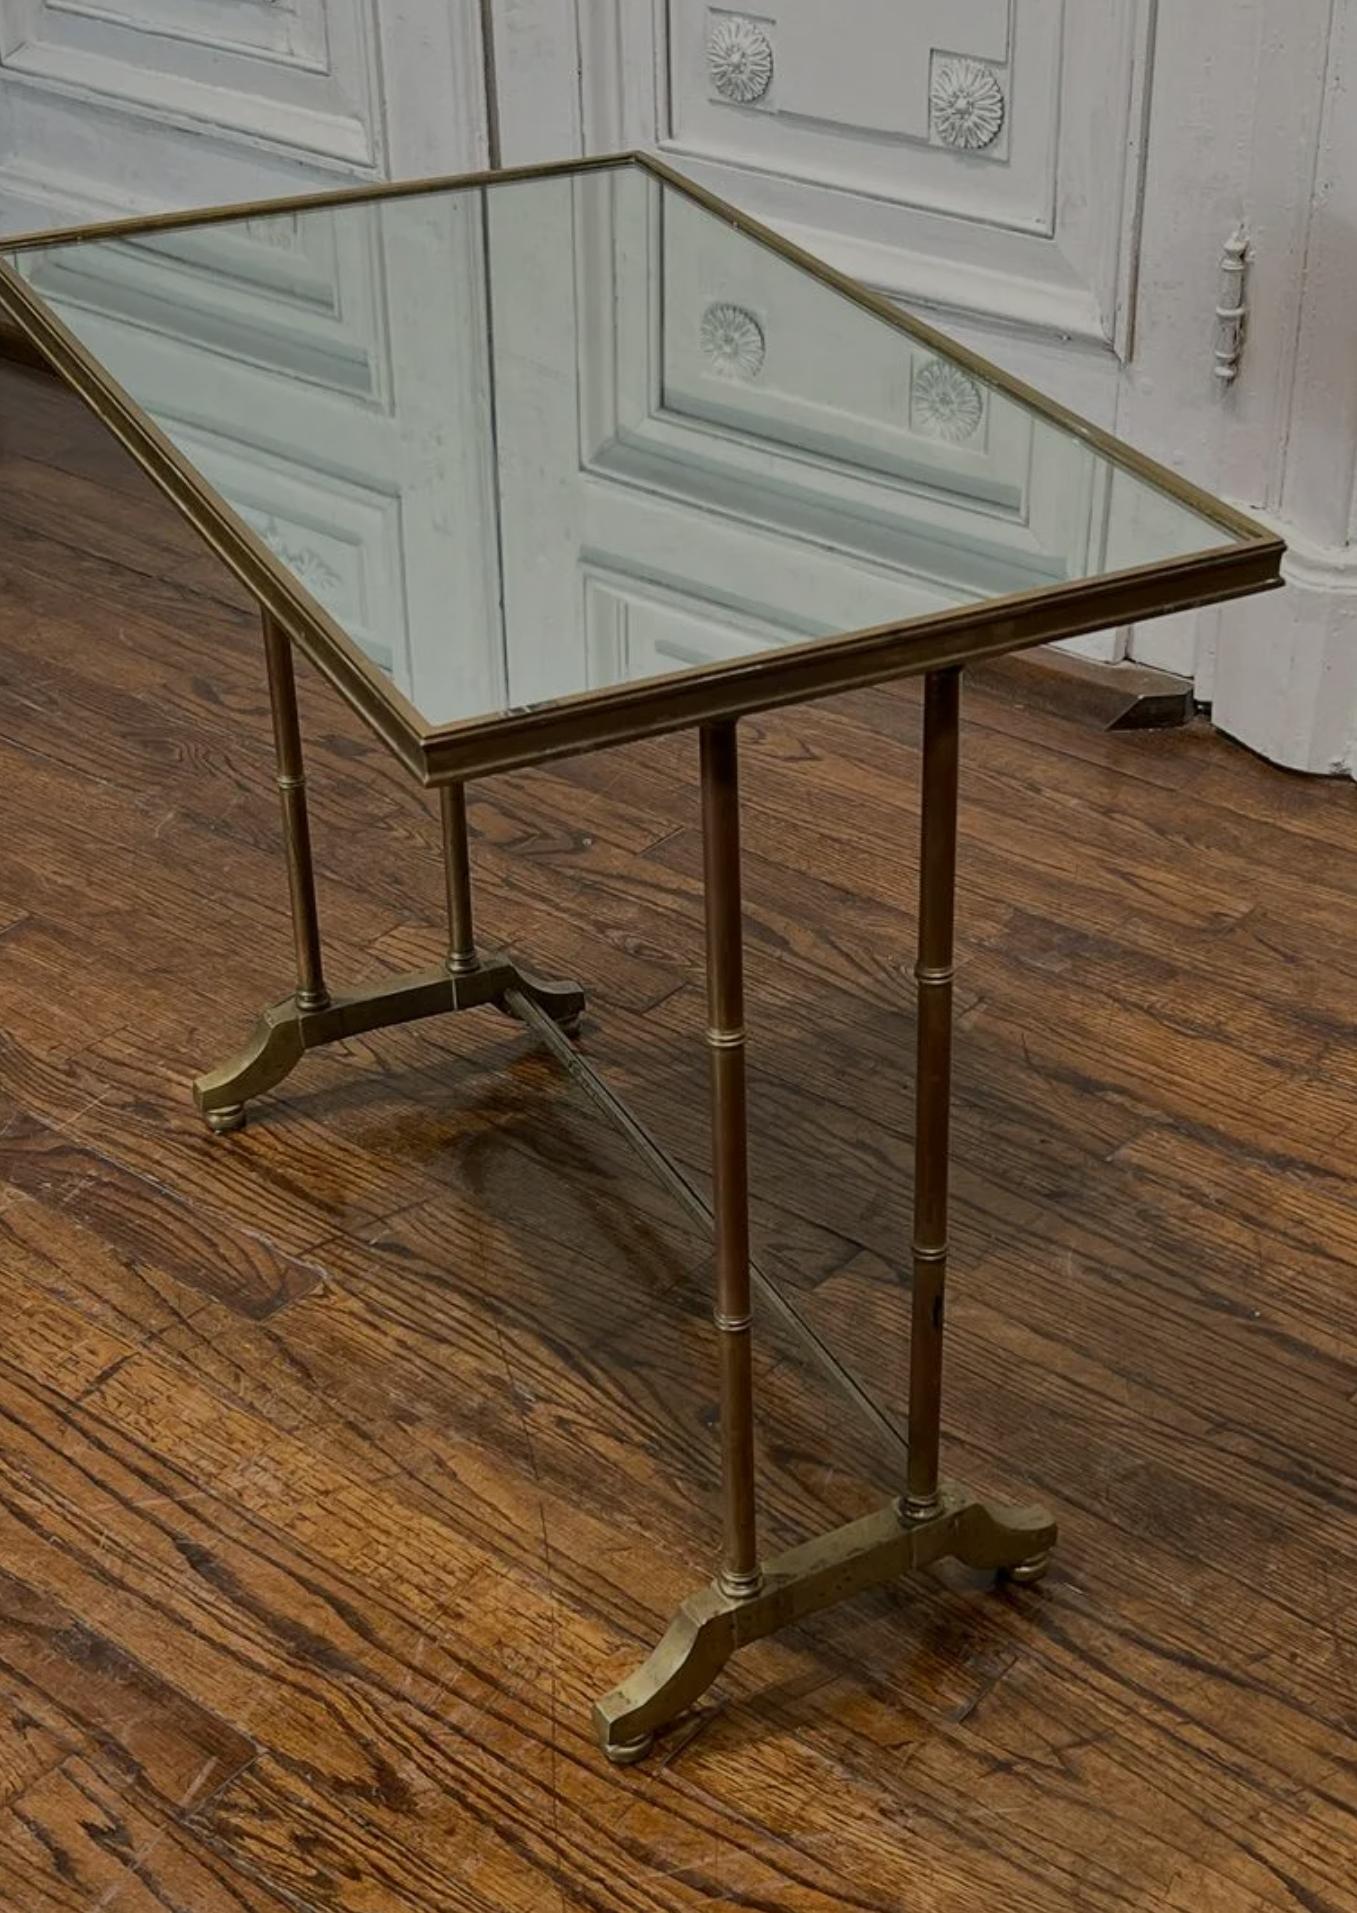 A Modern bronze mirrored side table, second half of 20th century, having a rectangular mirror tabletop, rising on faux bamboo supports, resting on trestle base.

Dimensions: (approx)
23.25